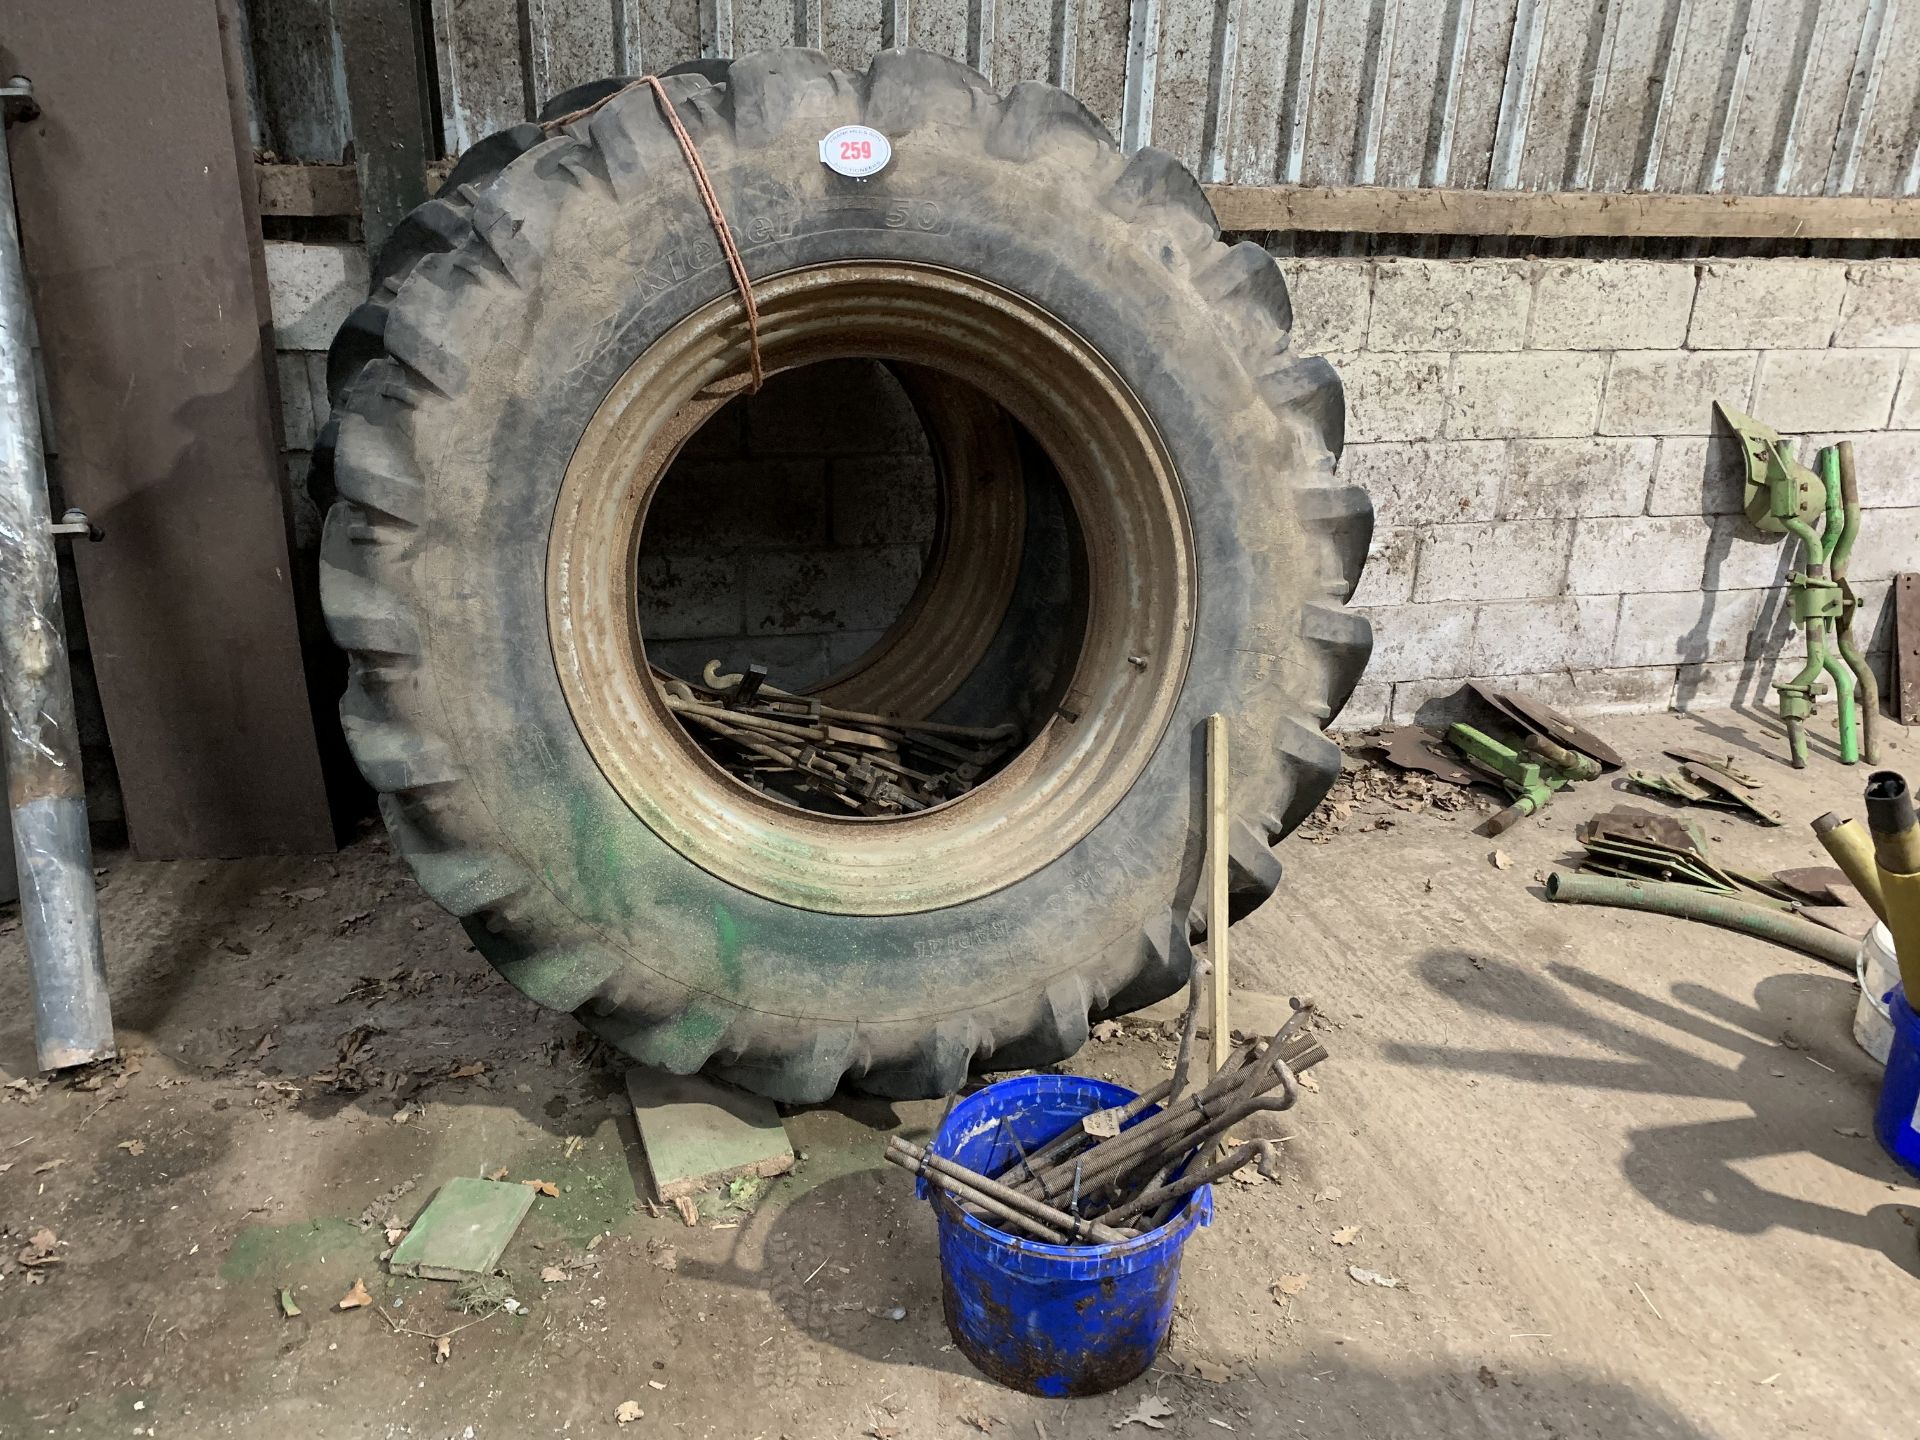 Pr dual wheels & tyres 18.4R38 60% tread, with clamps